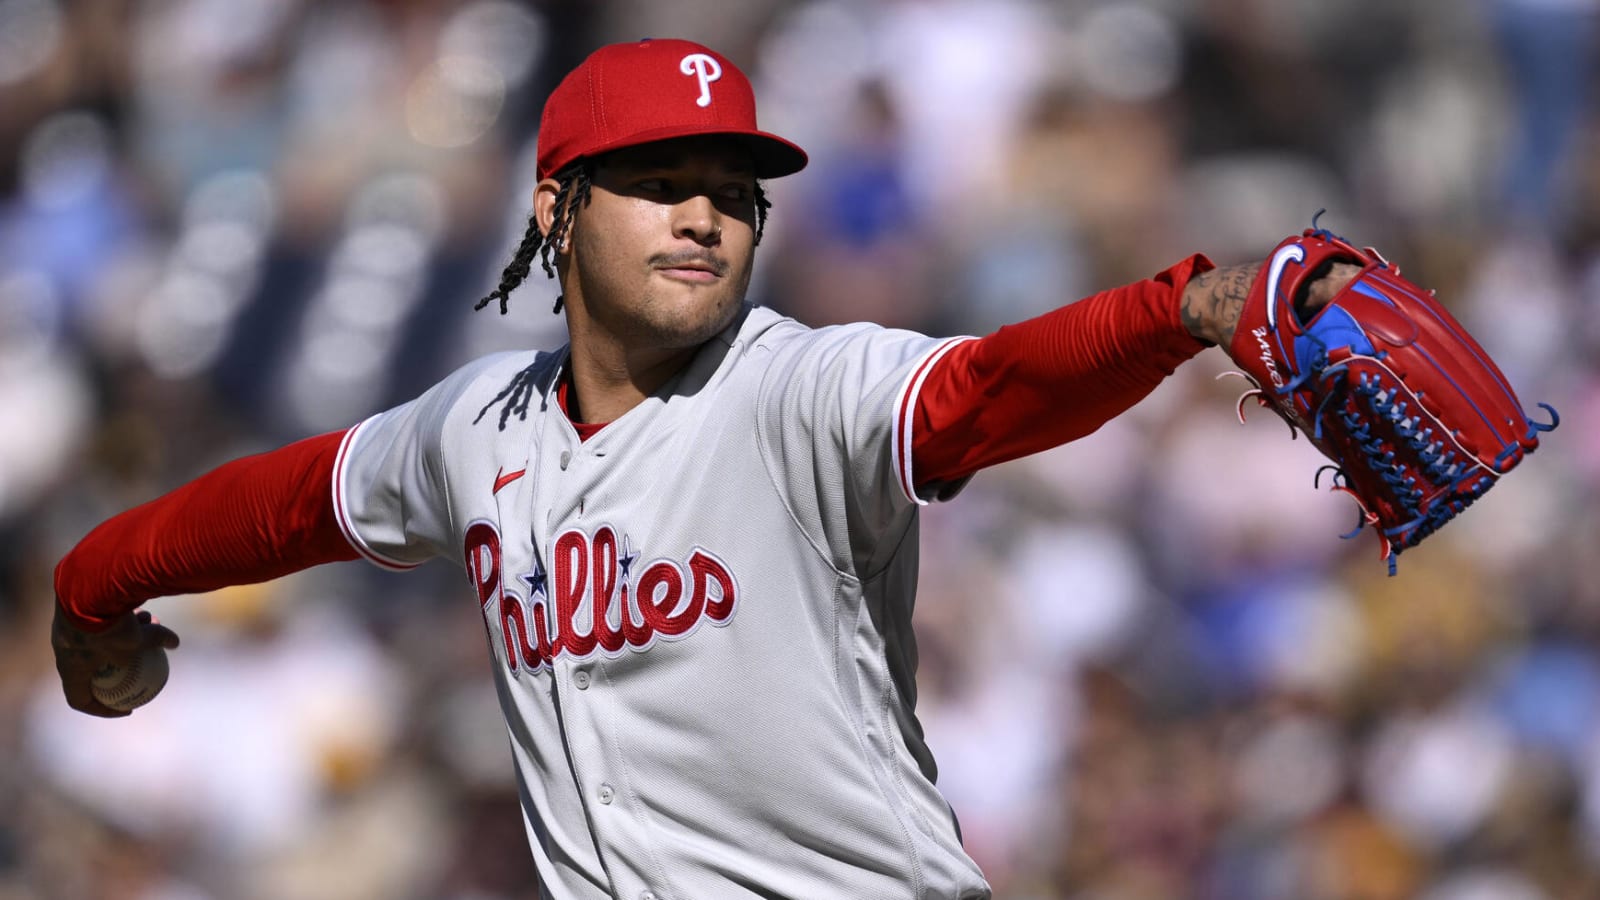 Report reveals why Taijuan Walker did not start Game 4 for Phillies